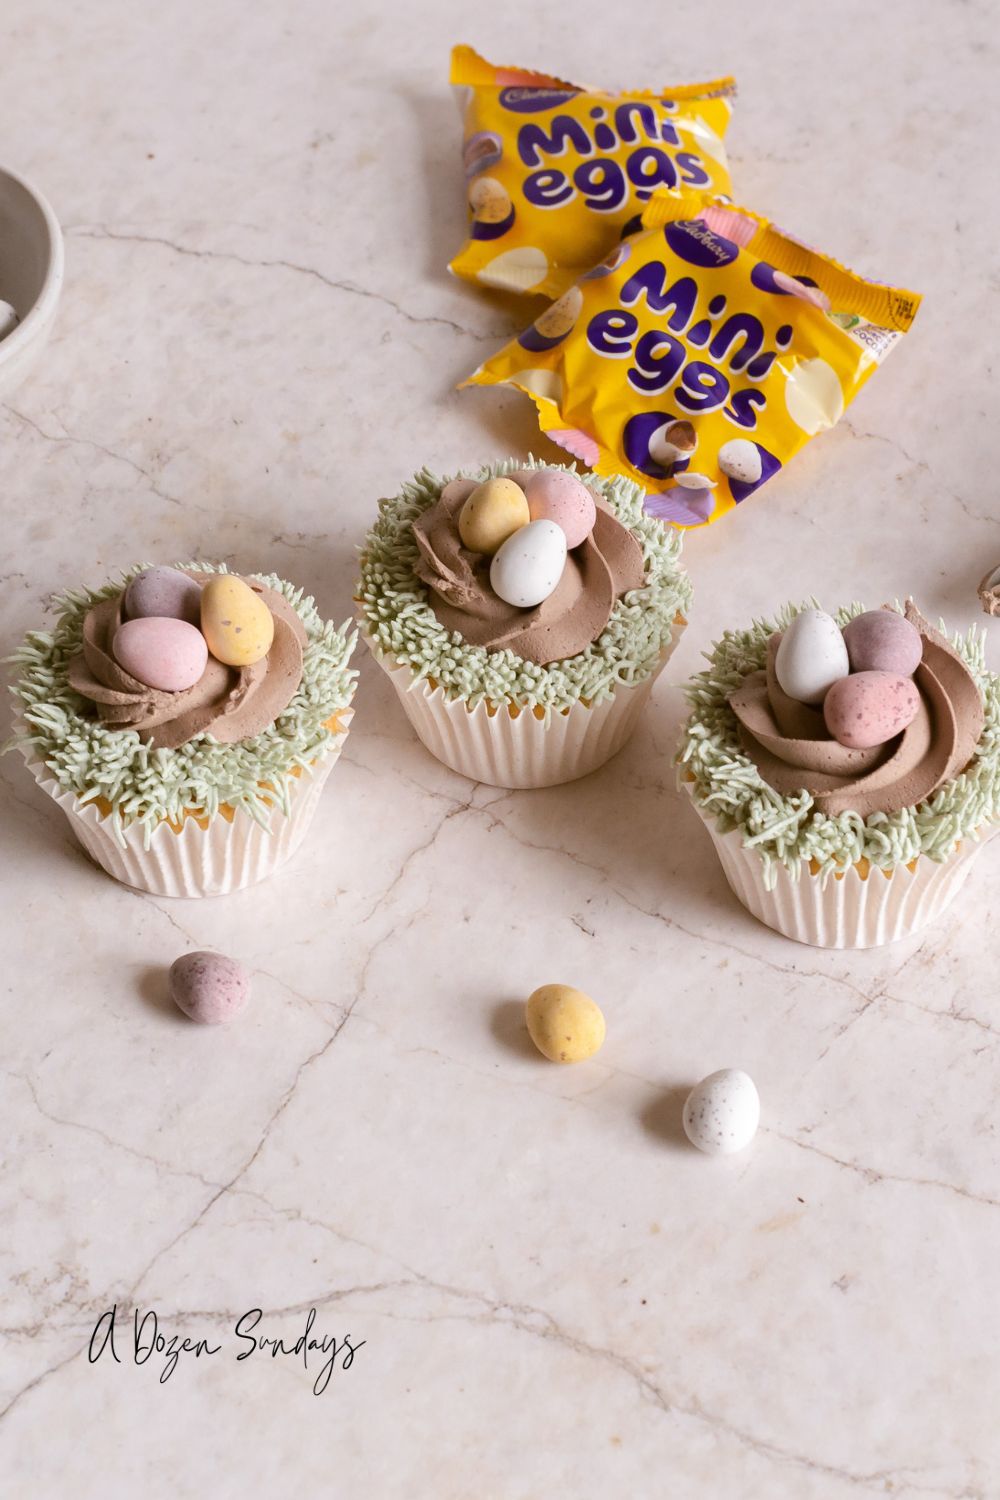 Mini Egg cupcakes for Easter by A Dozen Sundays